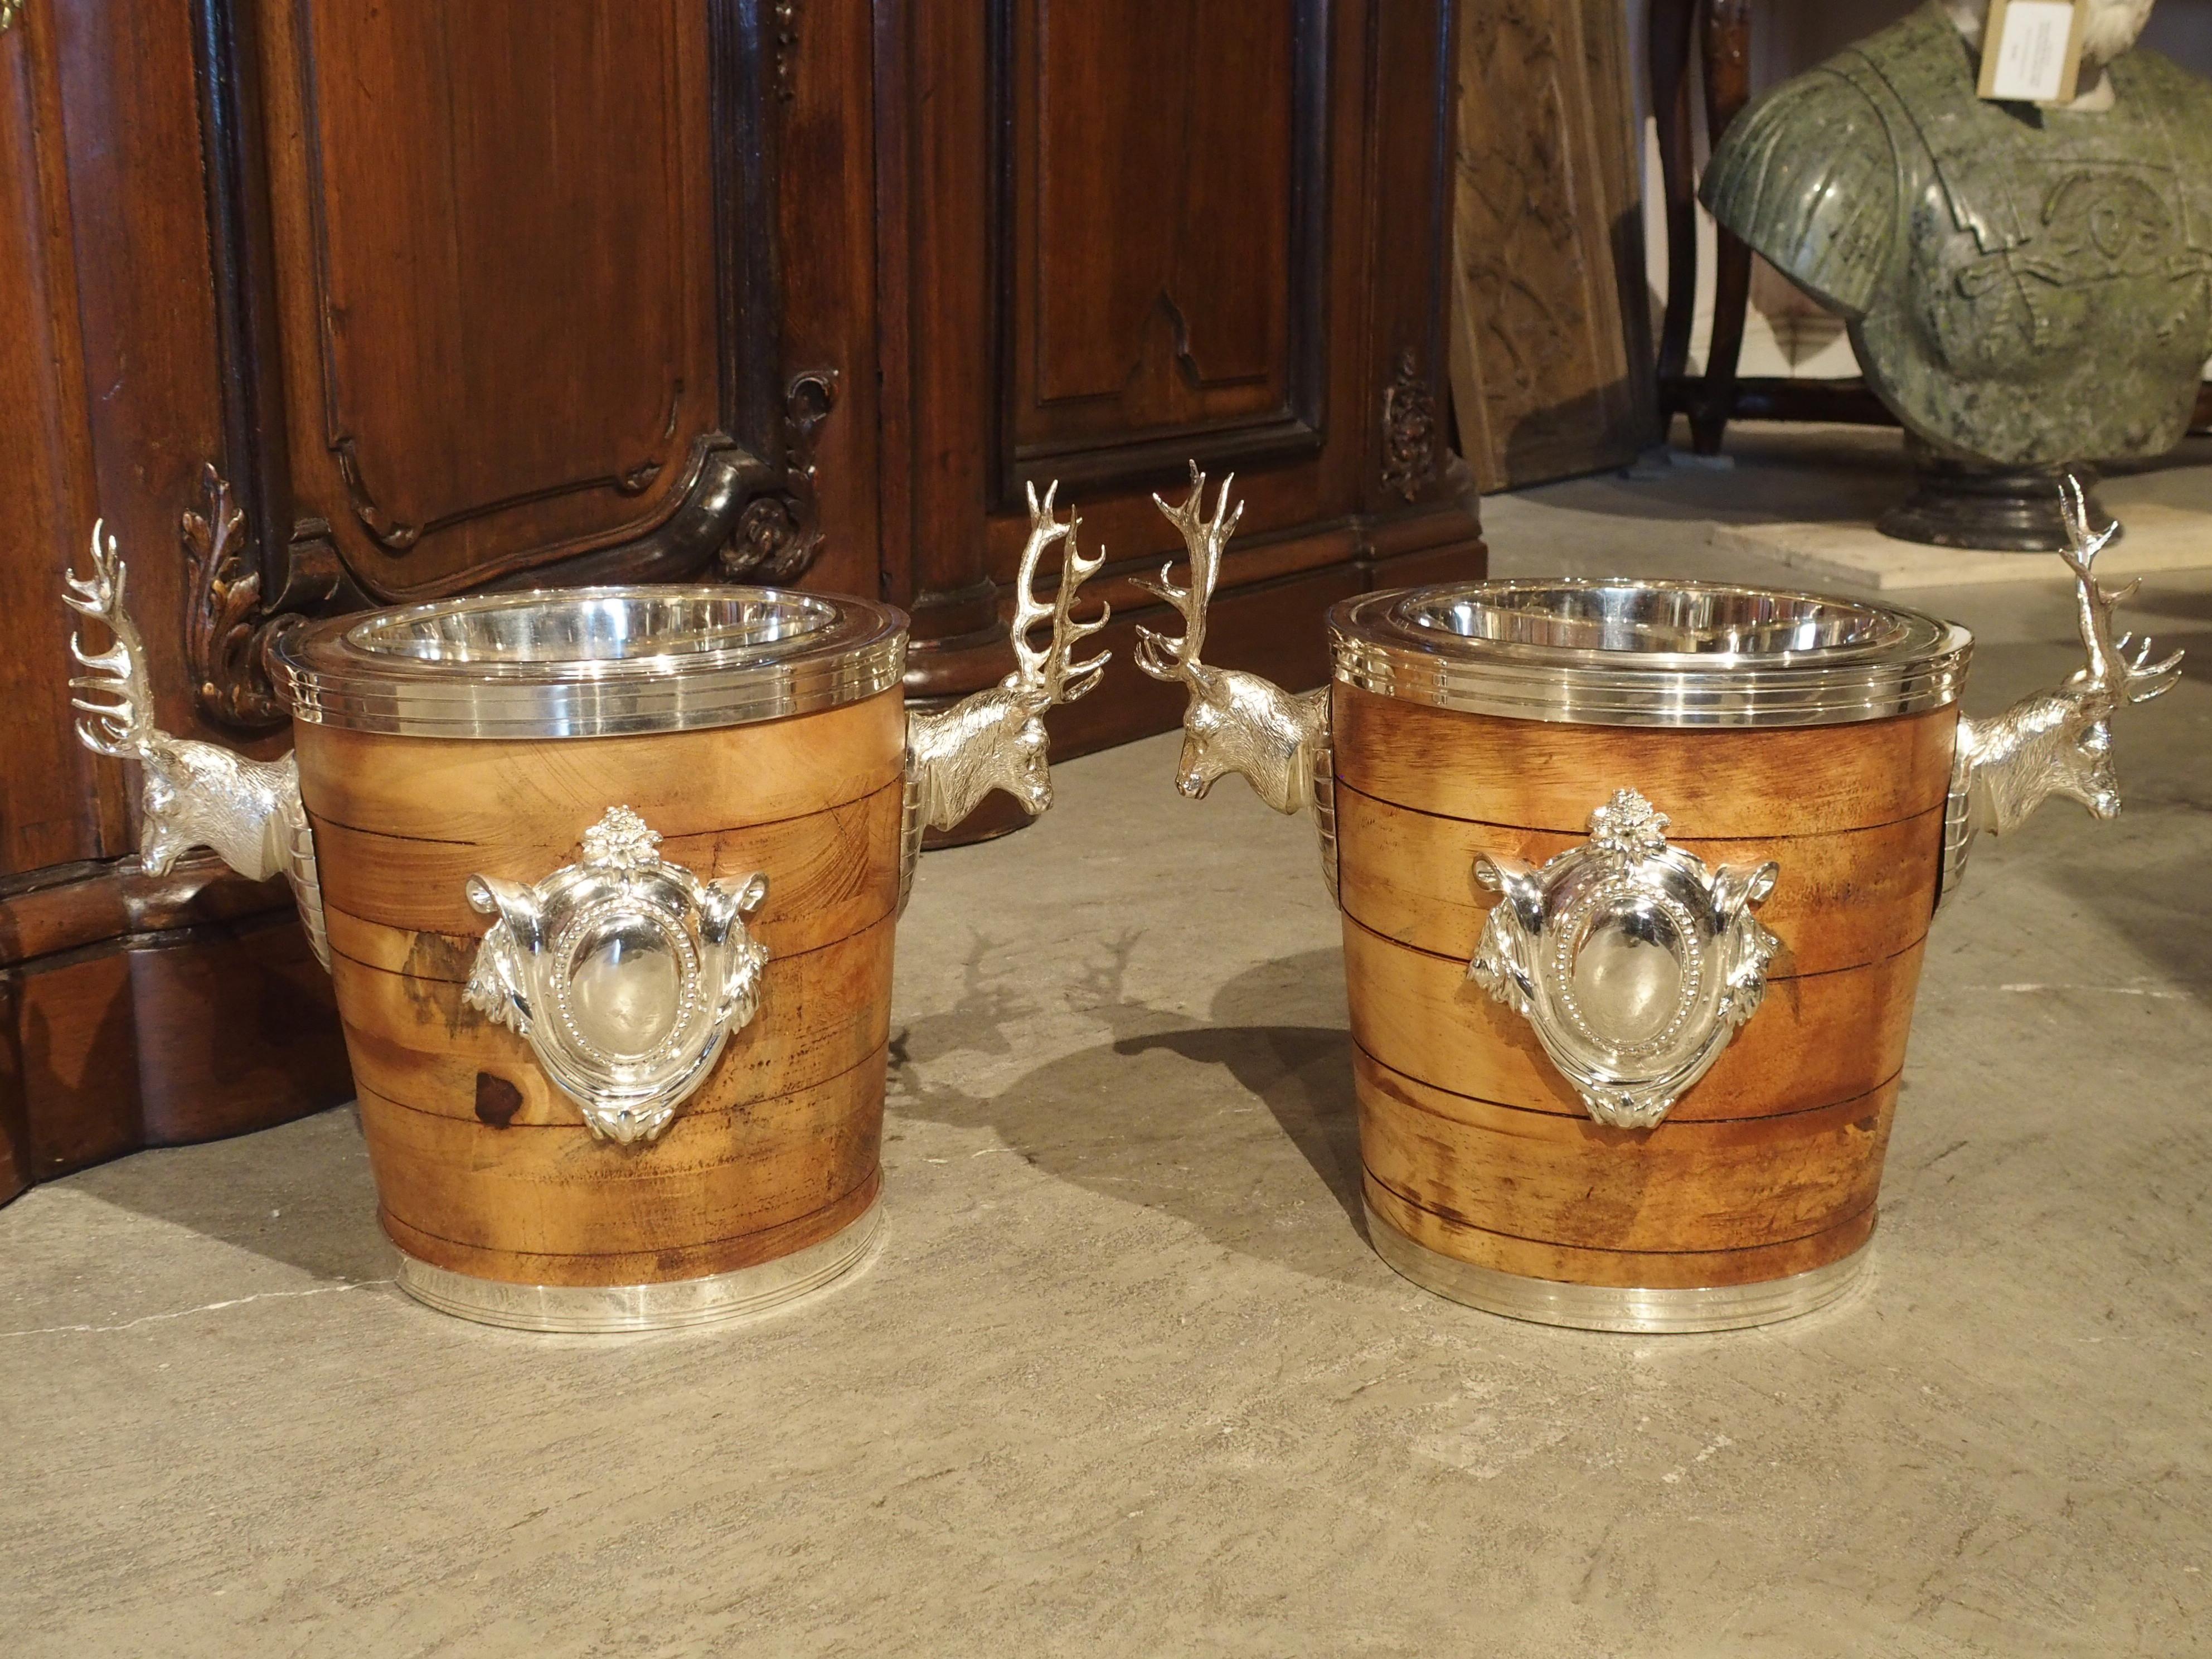 20th Century Pair of Silverplate and Wood Wine Coolers with Mounted Stags and Cartouches